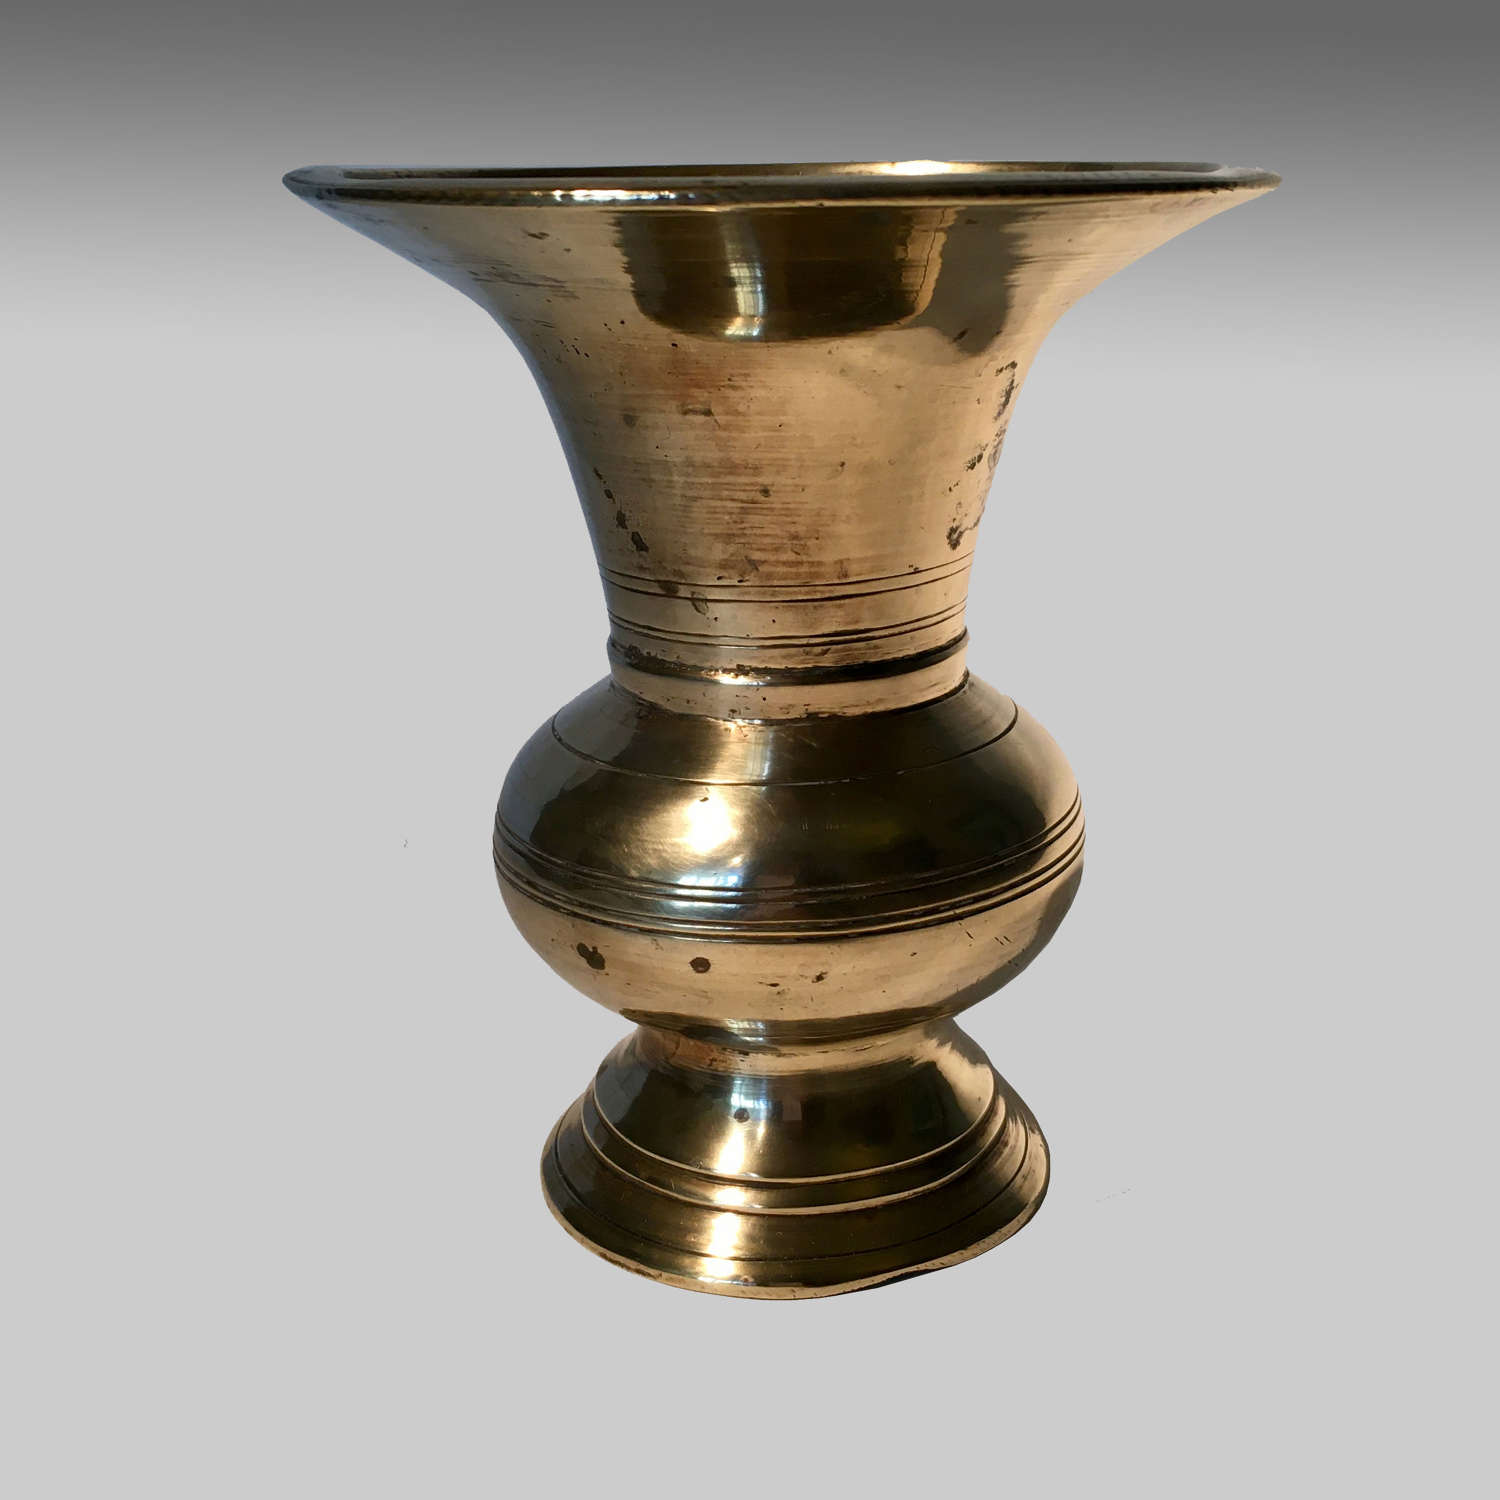 Anglo-Indian bell metal vase